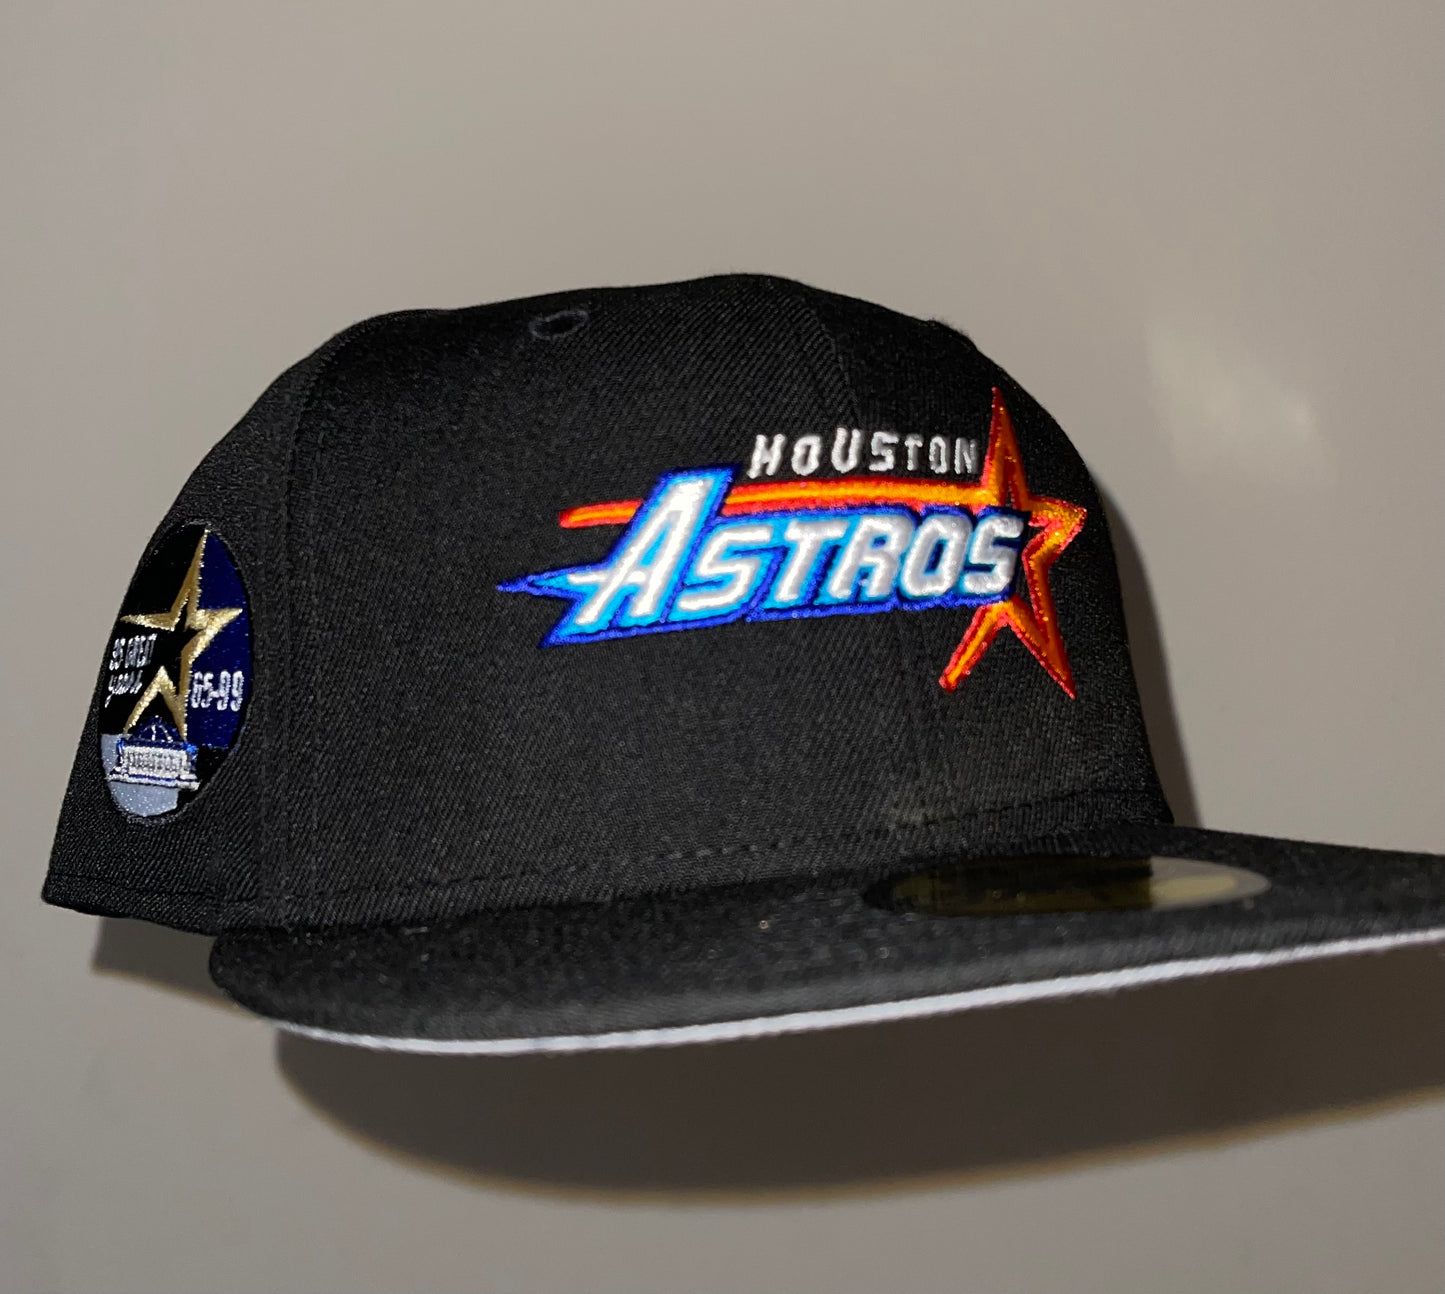 Houston Astros “Star Wars Theme” With 35 Great Years Side Patch Fitted Hat (Black/Blue/Orange)